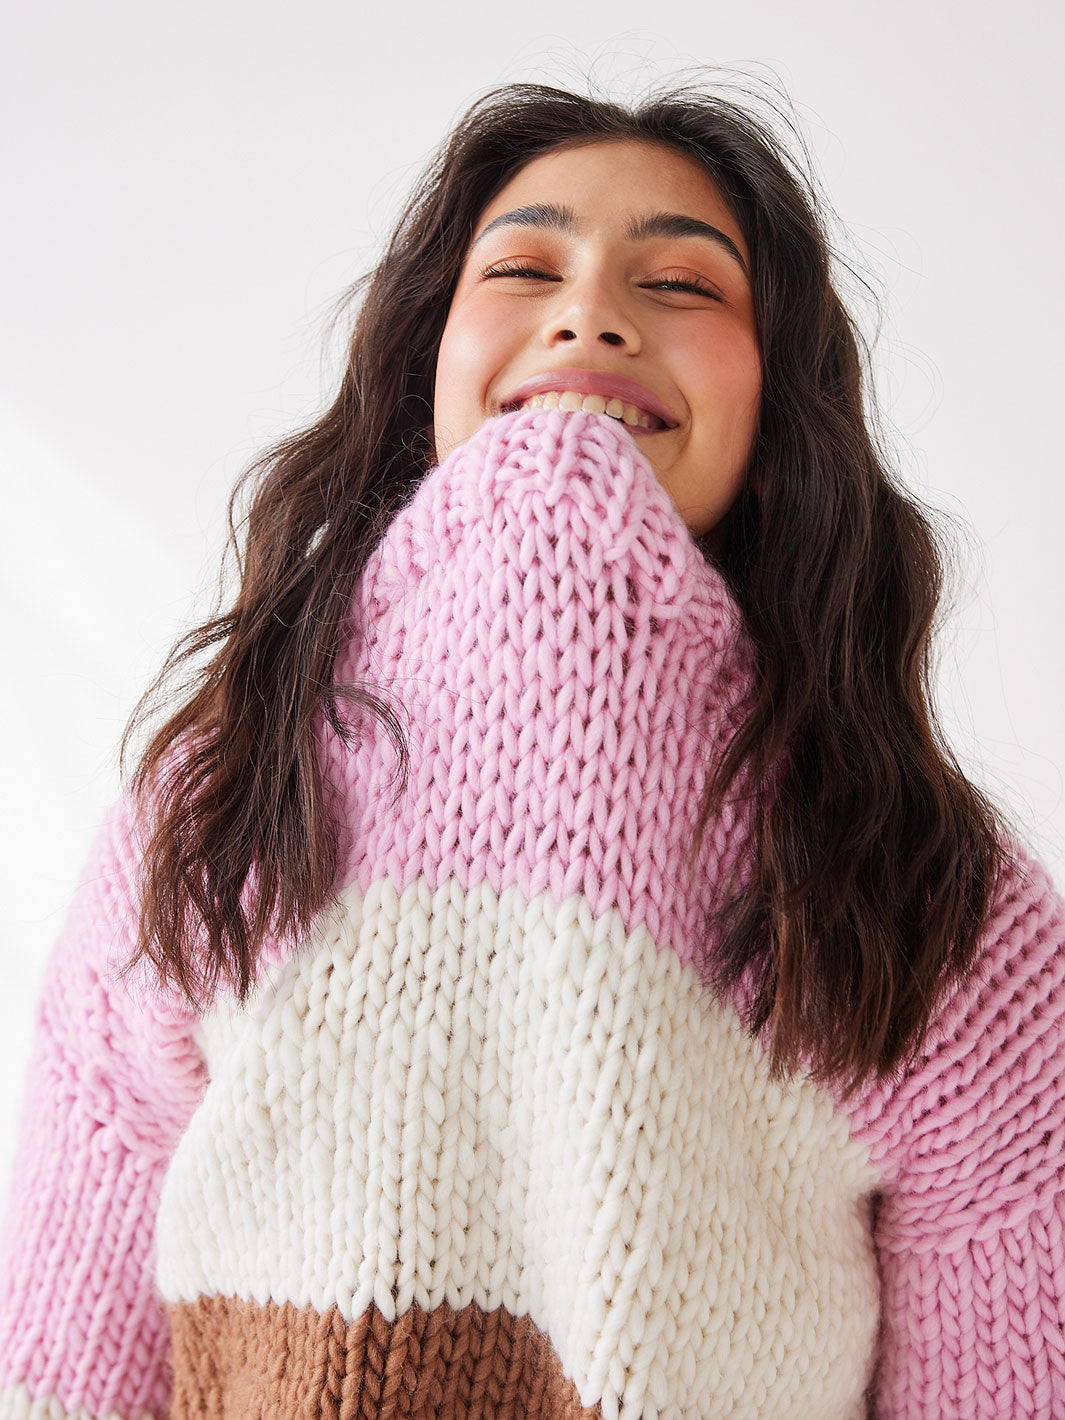 Girl looks at camera smiling with chunky knitted jumper 